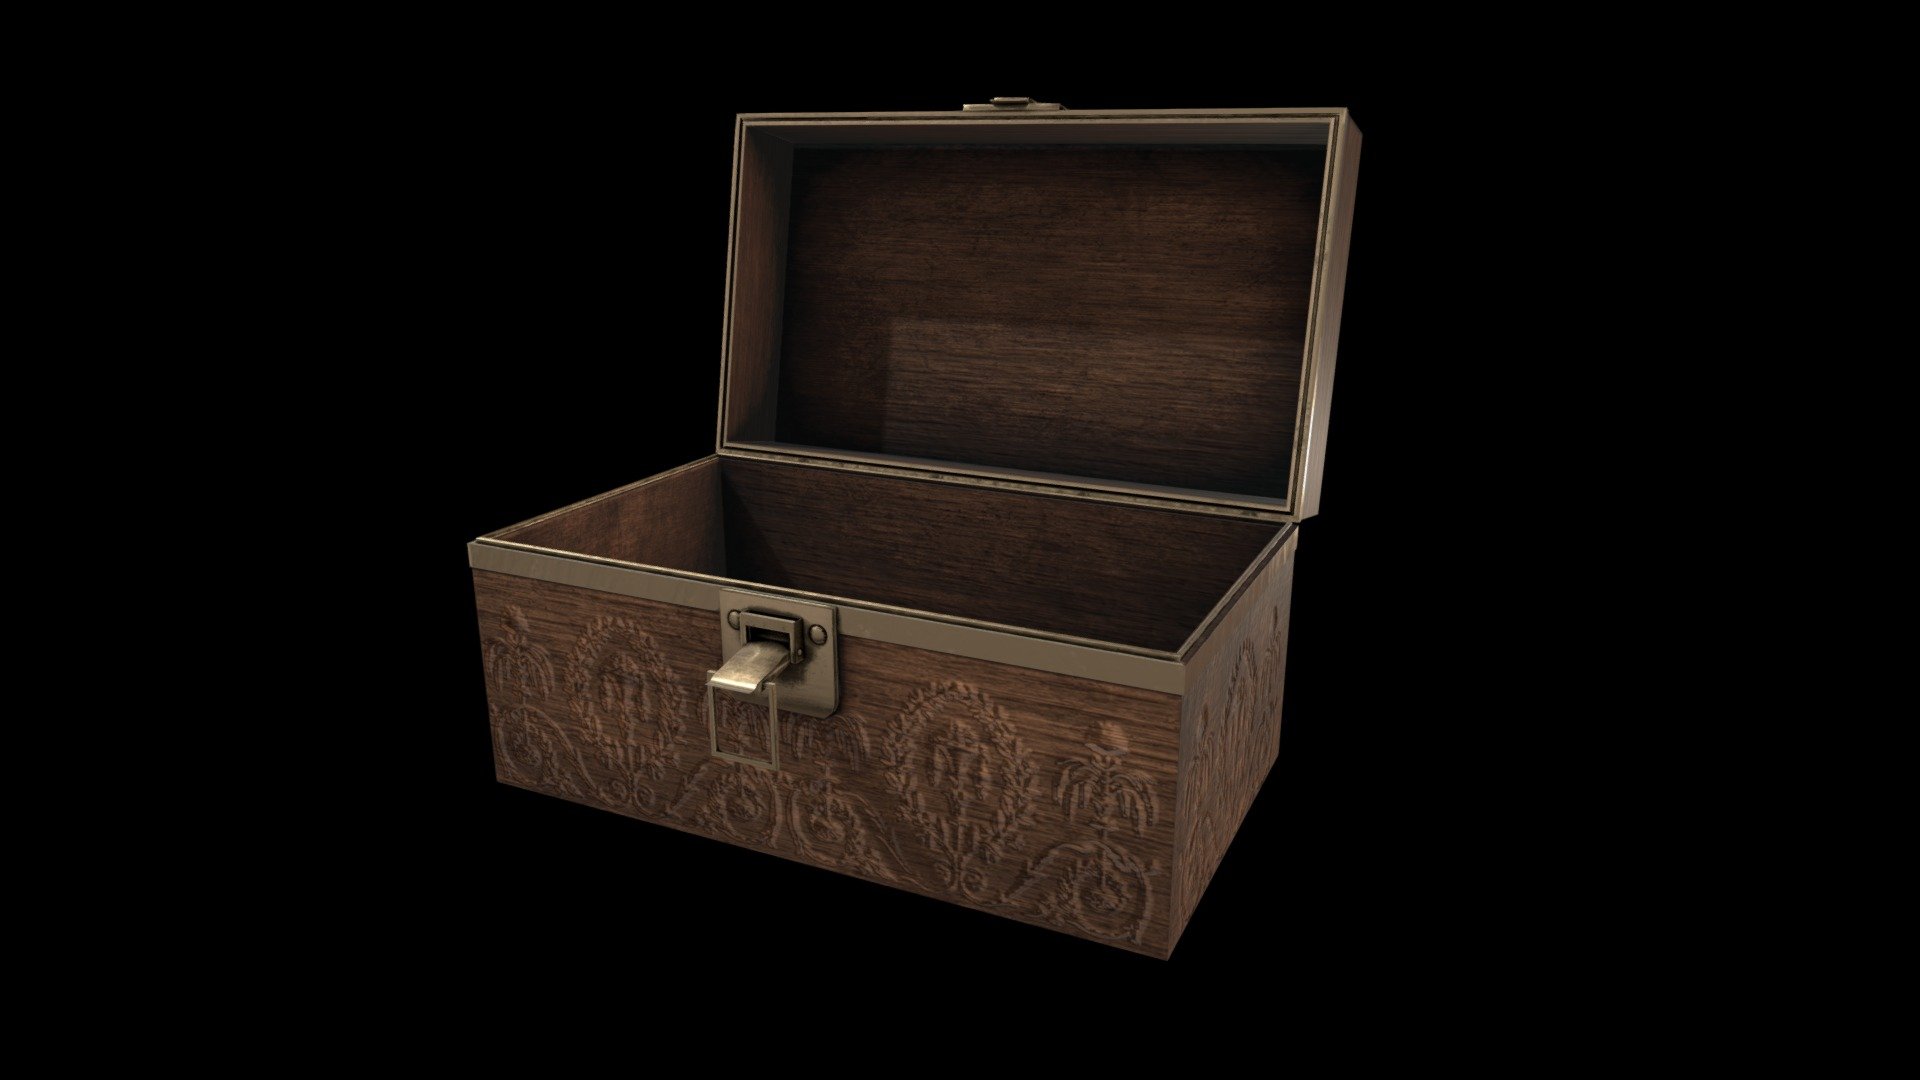 This is a small wooden storage box with faded bronze edges, lock and hinges. Great addition to a room environment! - Wooden Storage Box - Download Free 3D model by FordVFX 3d model